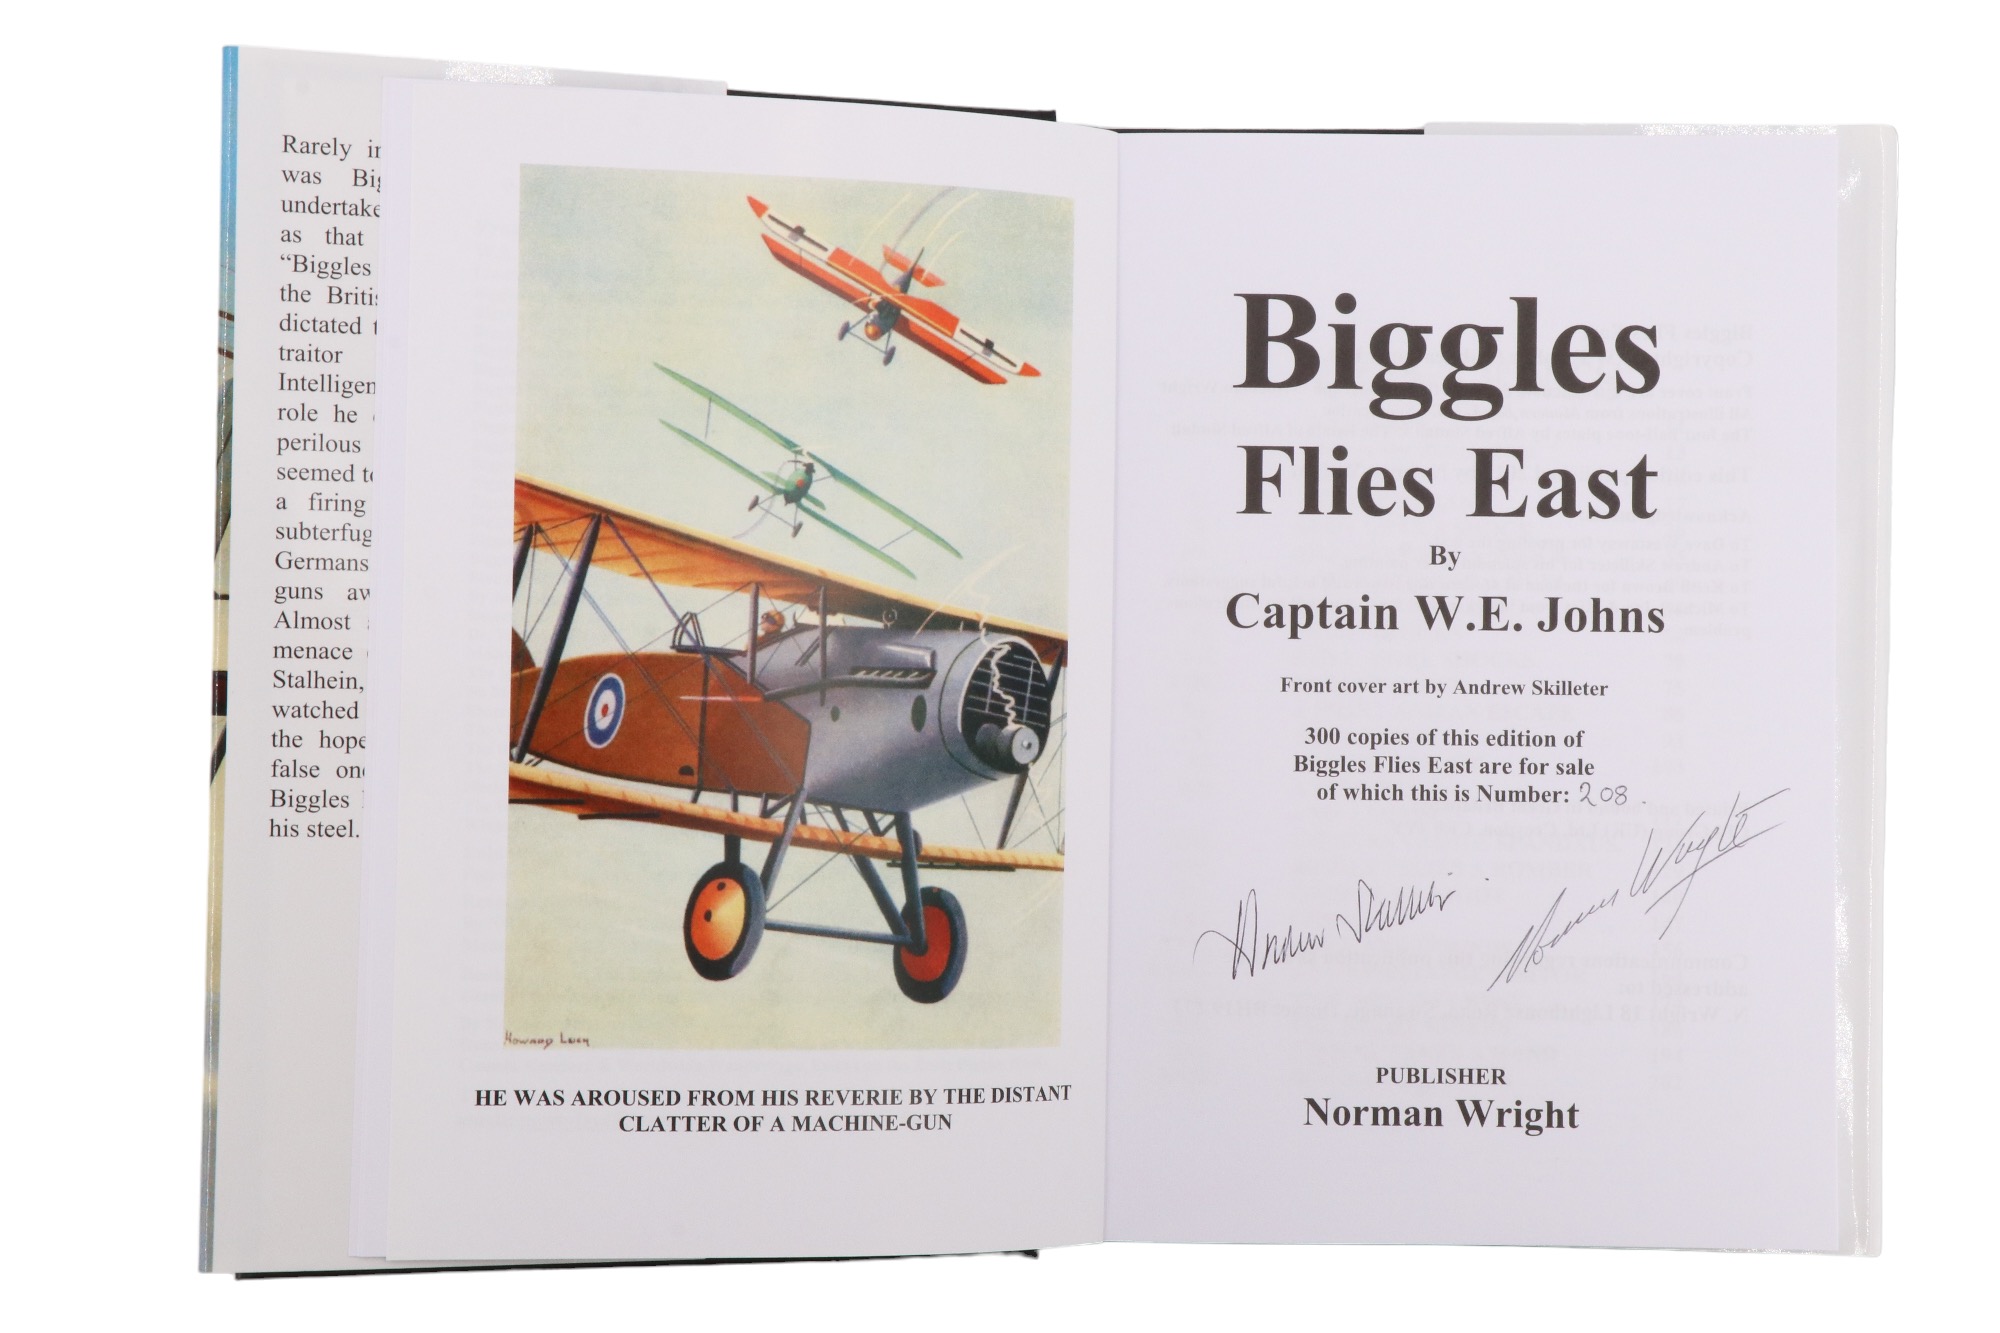 Captain W E Johns, "Biggles Flies East", one of a limited edition of 300 copies, signed by publisher - Image 4 of 4